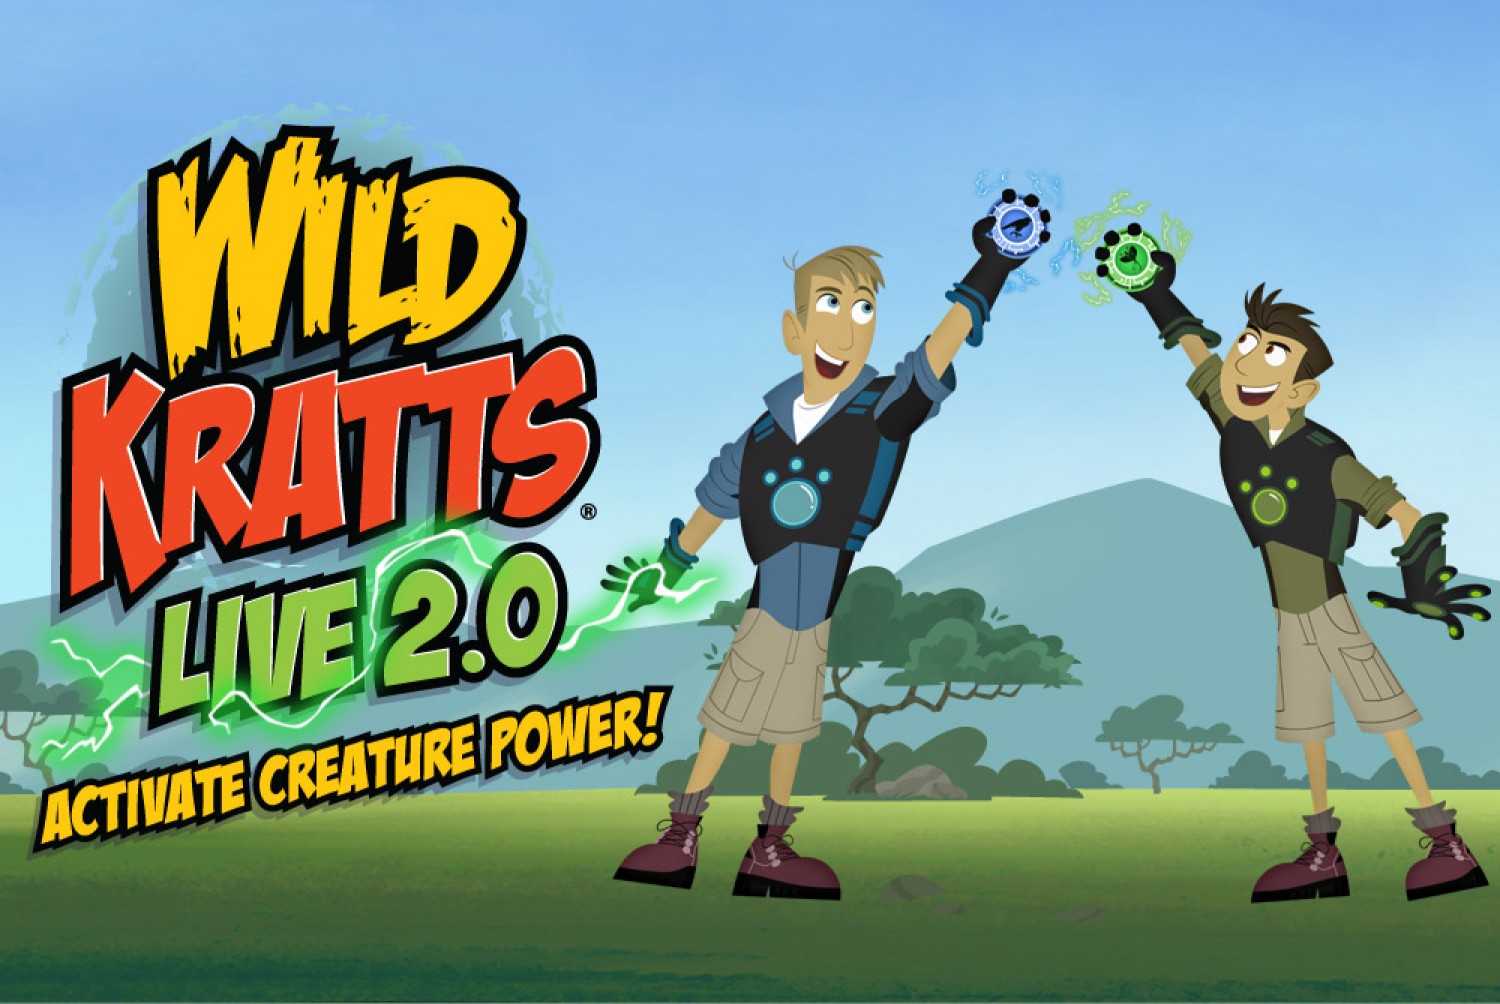 Wild Kratts LIVE 2.0 - Activate Creature Power @ EKU Center for the Arts